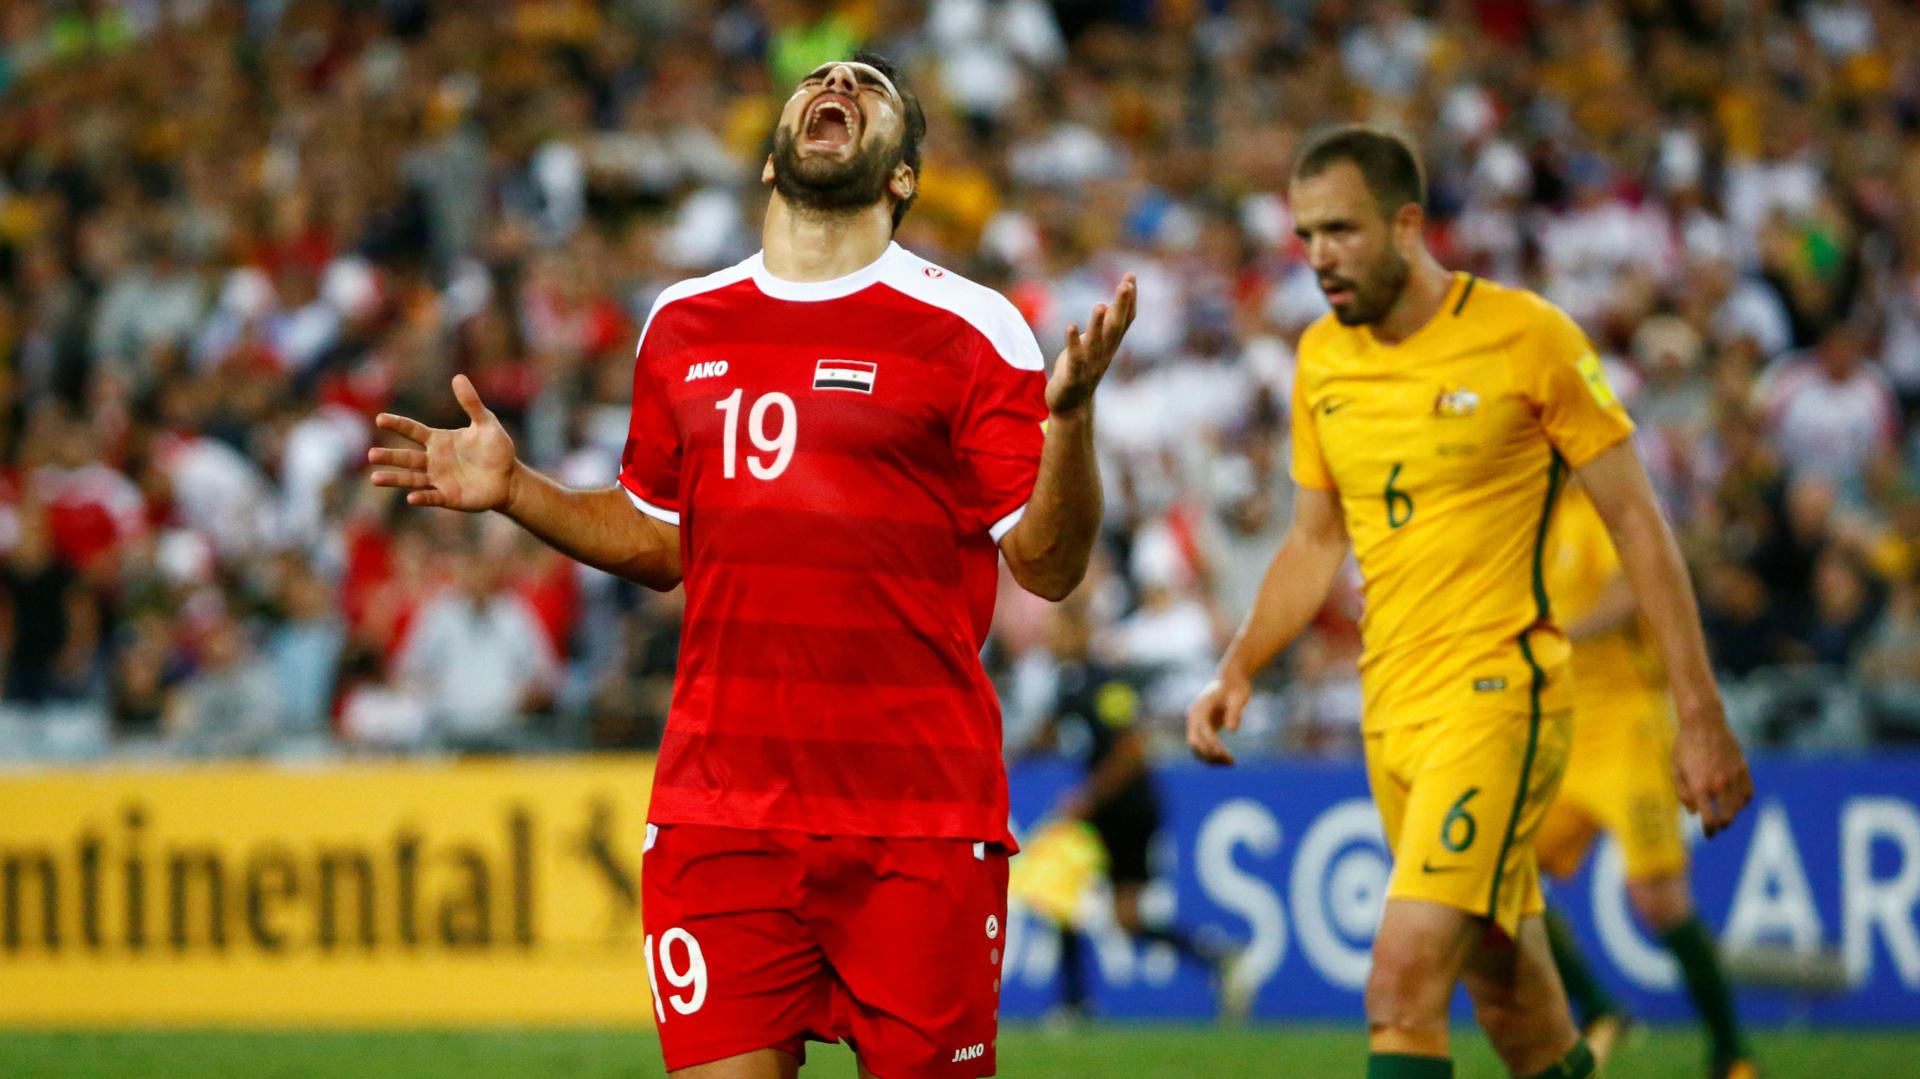 Australia crushed Syria's World Cup dreams in a 2-1 match in Sydney on Tuesday. Some Syrians celebrated the loss.